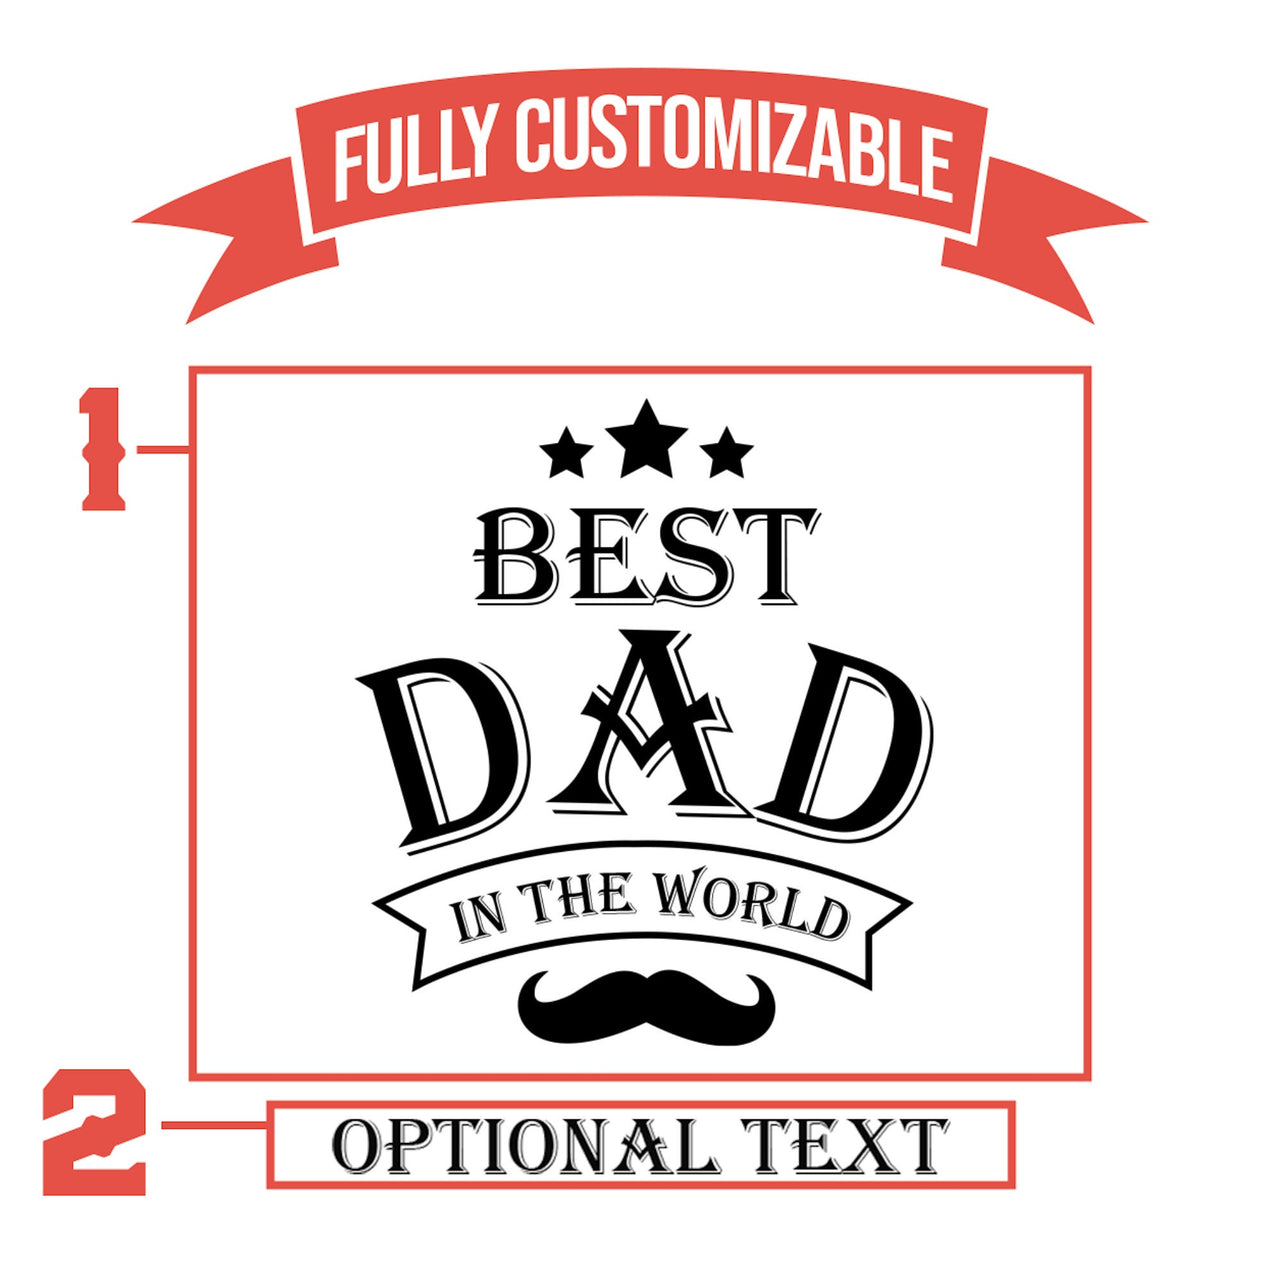 Best Dad in the World Whiskey Glasses Gifts For Dad